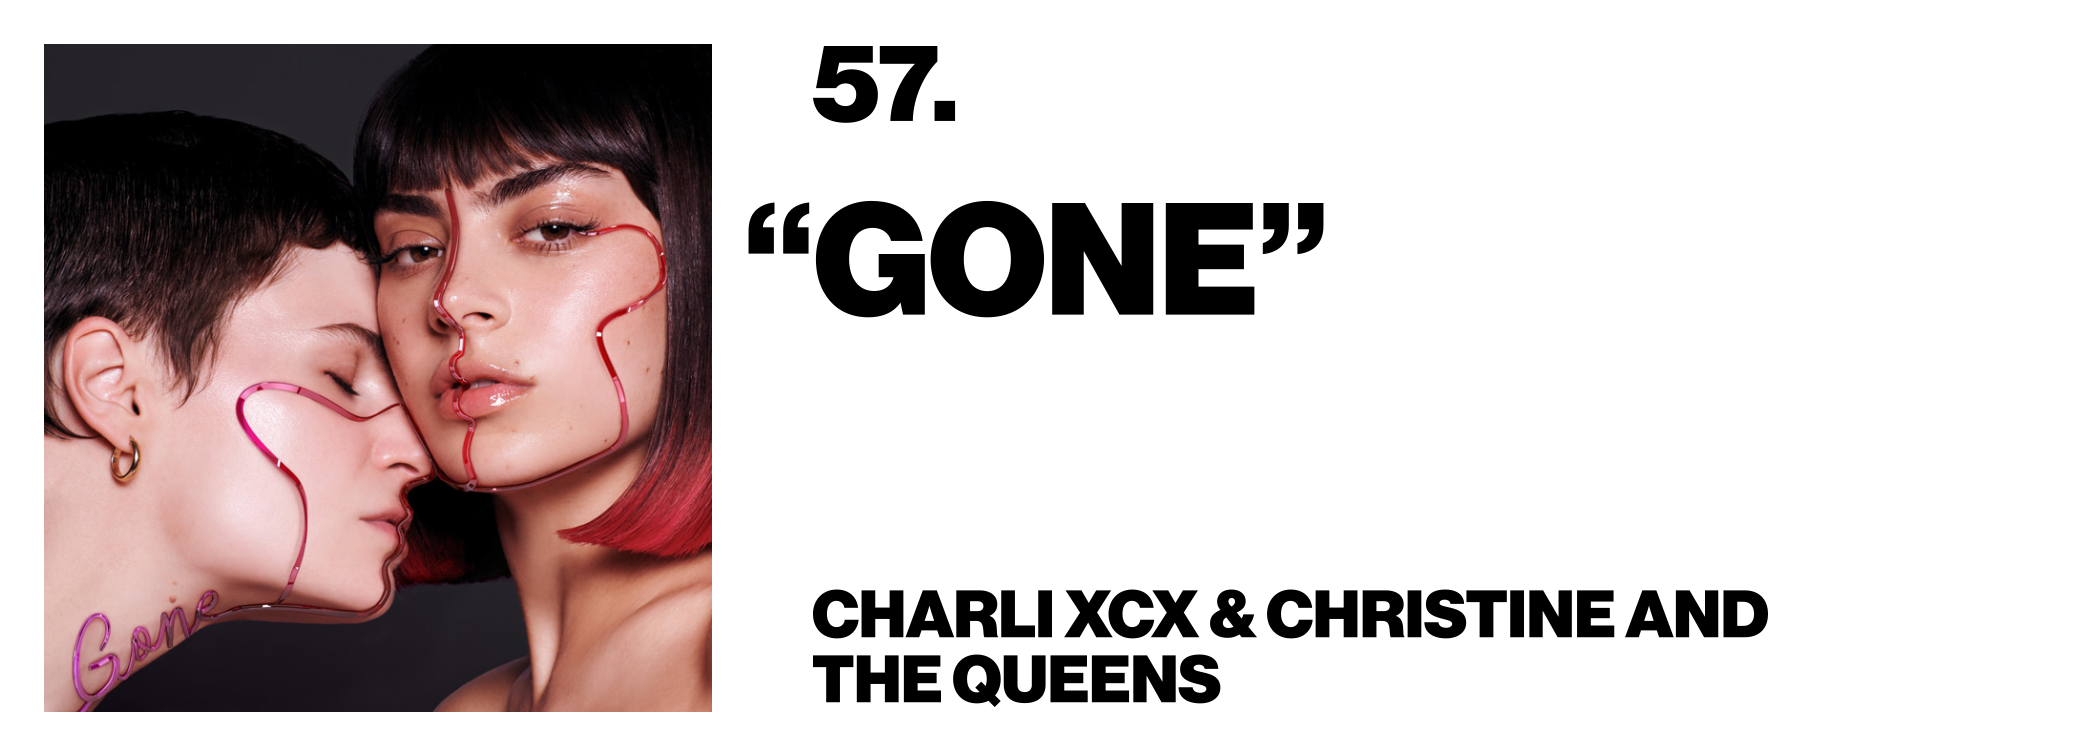 1576622184420-57-Charli-XCX-_-Christine-the-Queens-Gone-1